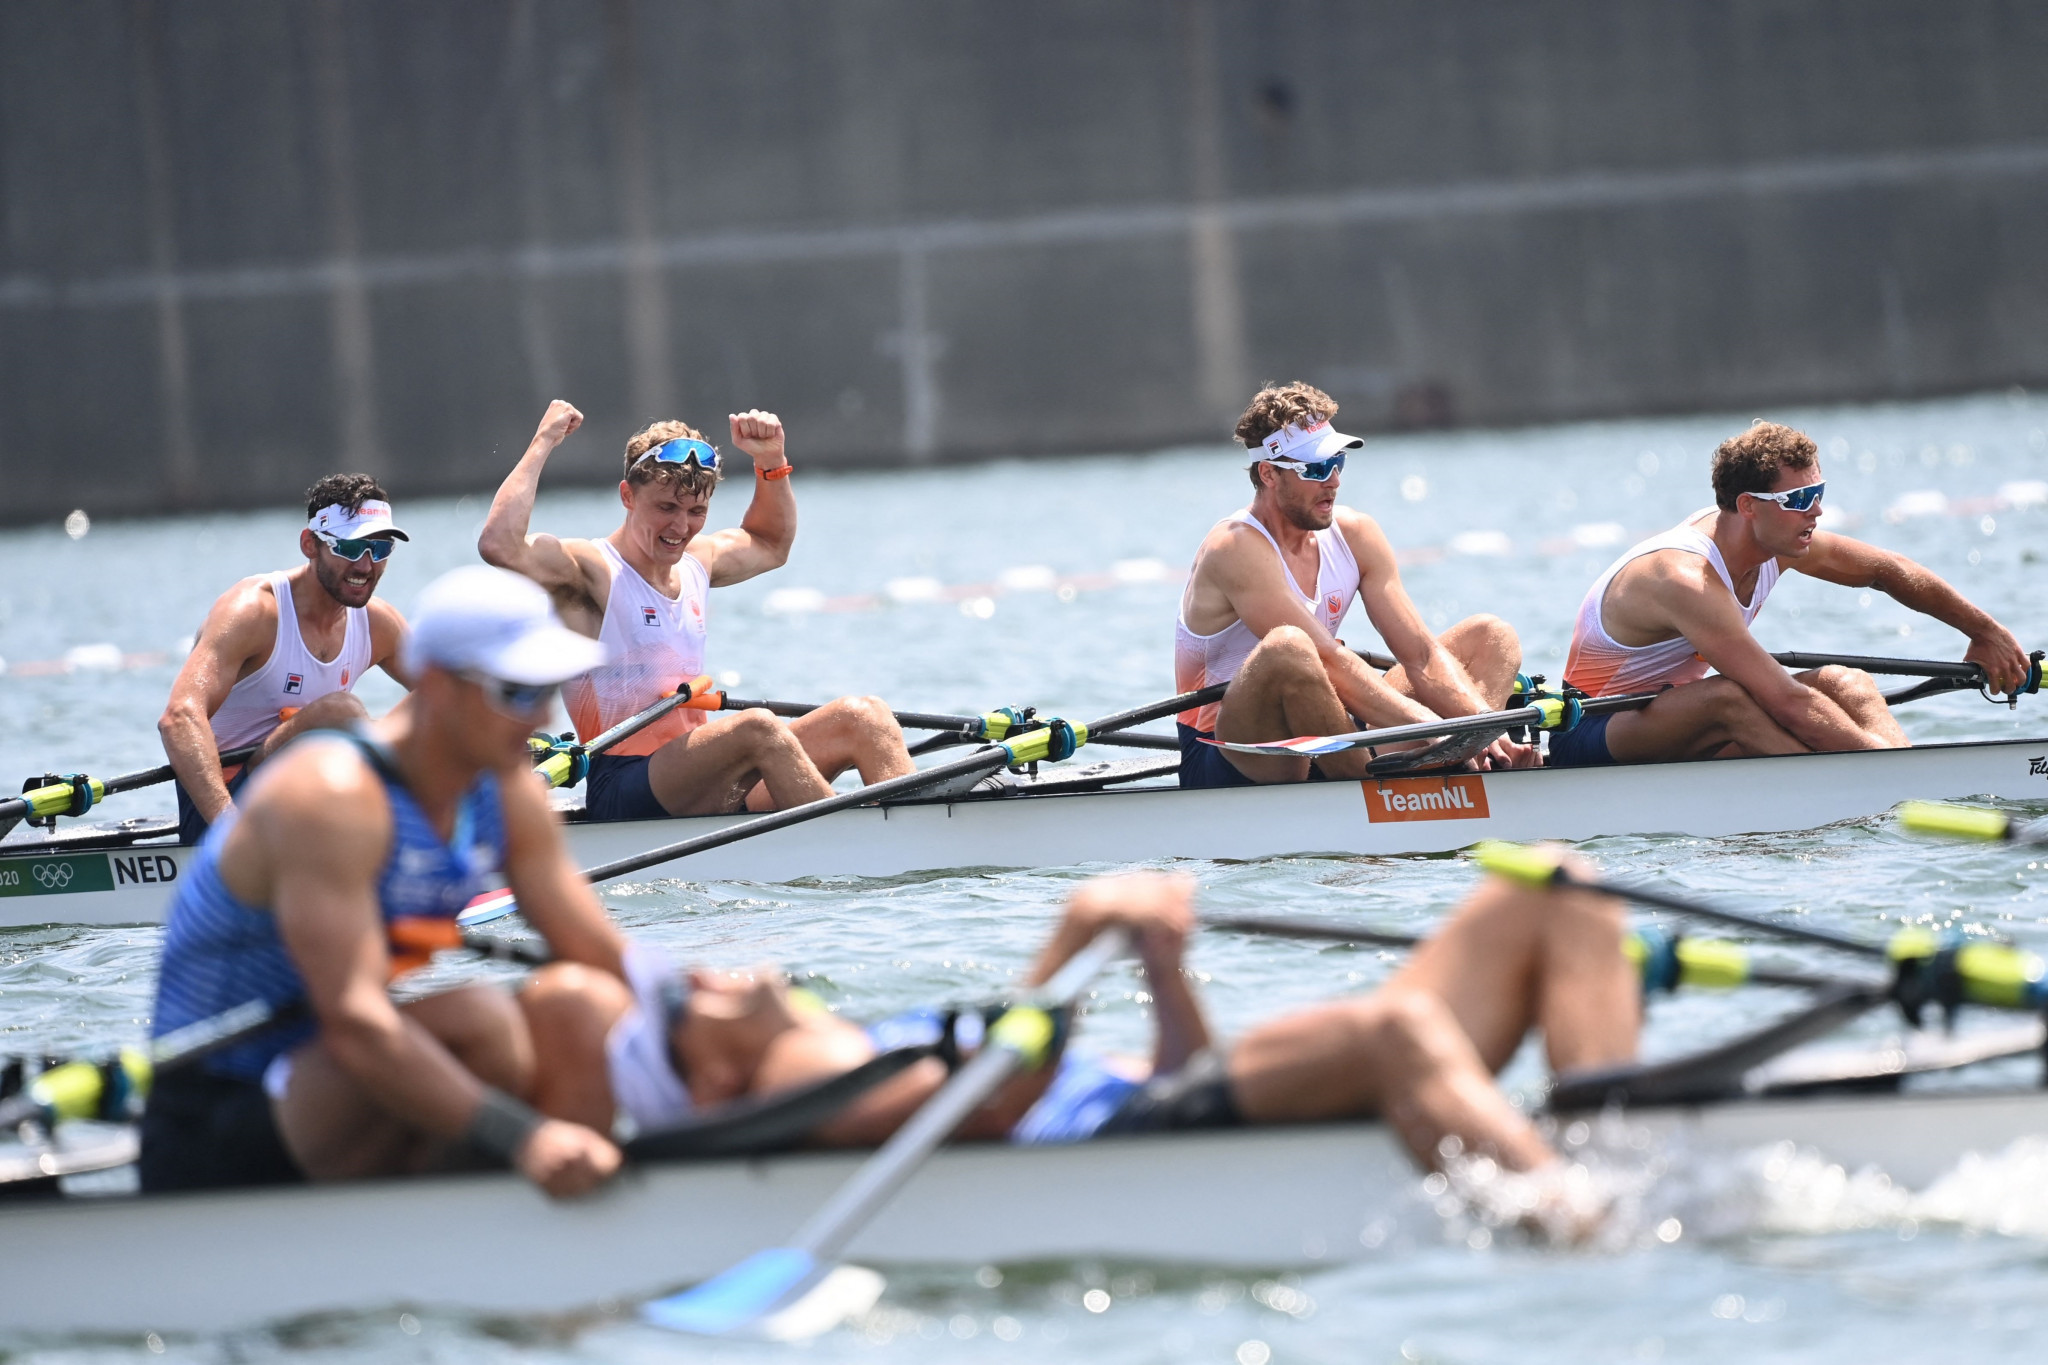 The Netherlands previously hosted the World Rowing Championships in 2014 and 2016 and has now expressed interest in holding the event again in 2025 ©Getty Images